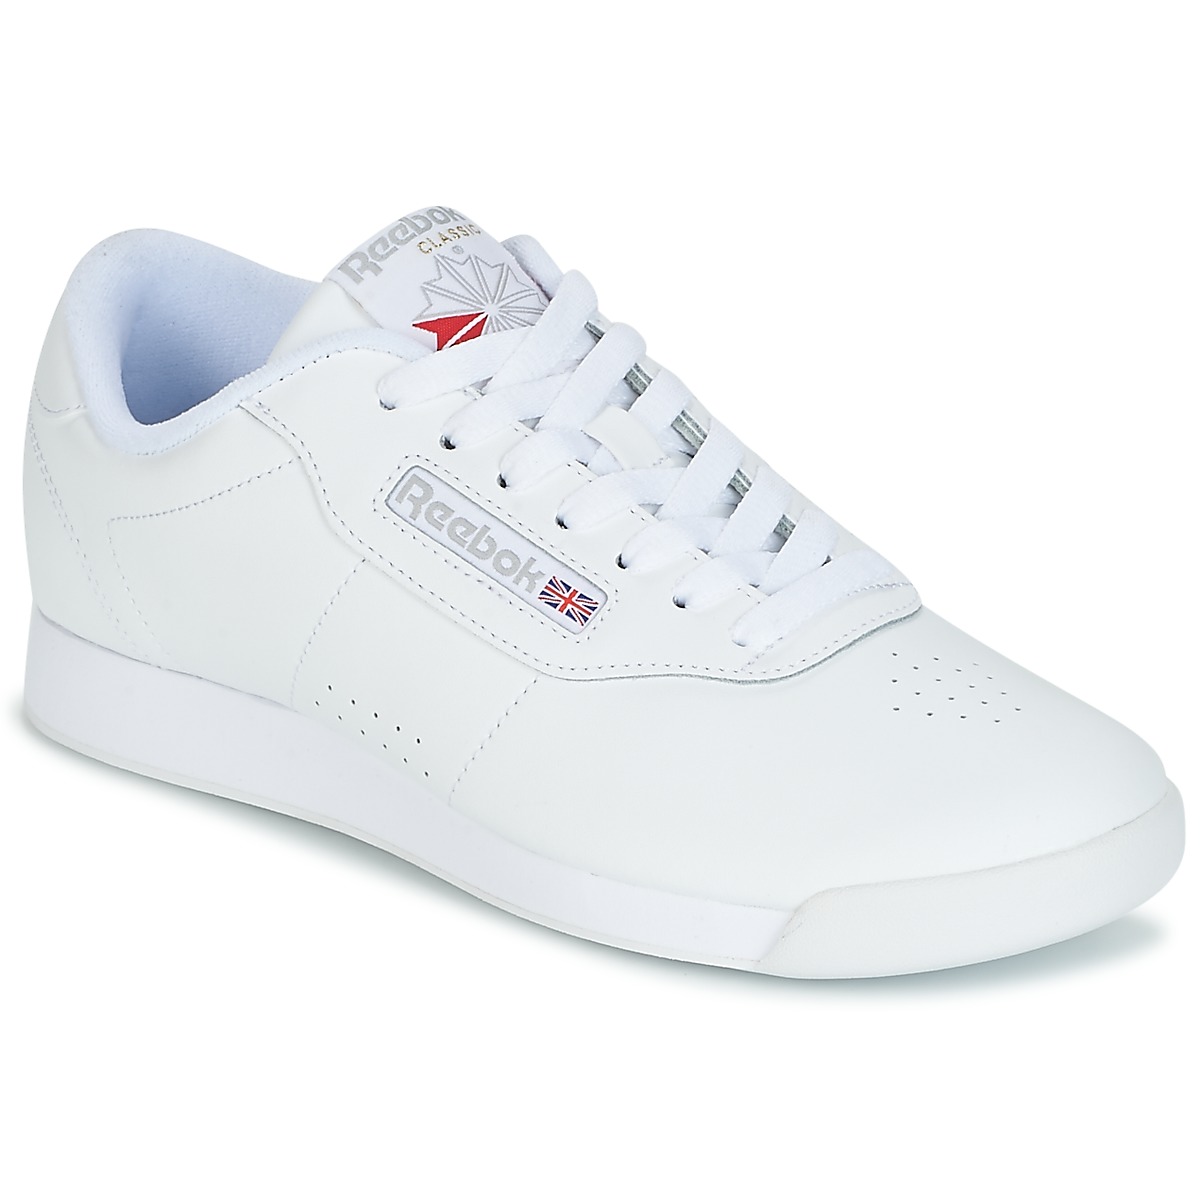 Reebok Classic PRINCESS White - Free delivery | Spartoo NET ! Shoes top trainers Women USD/$82.50